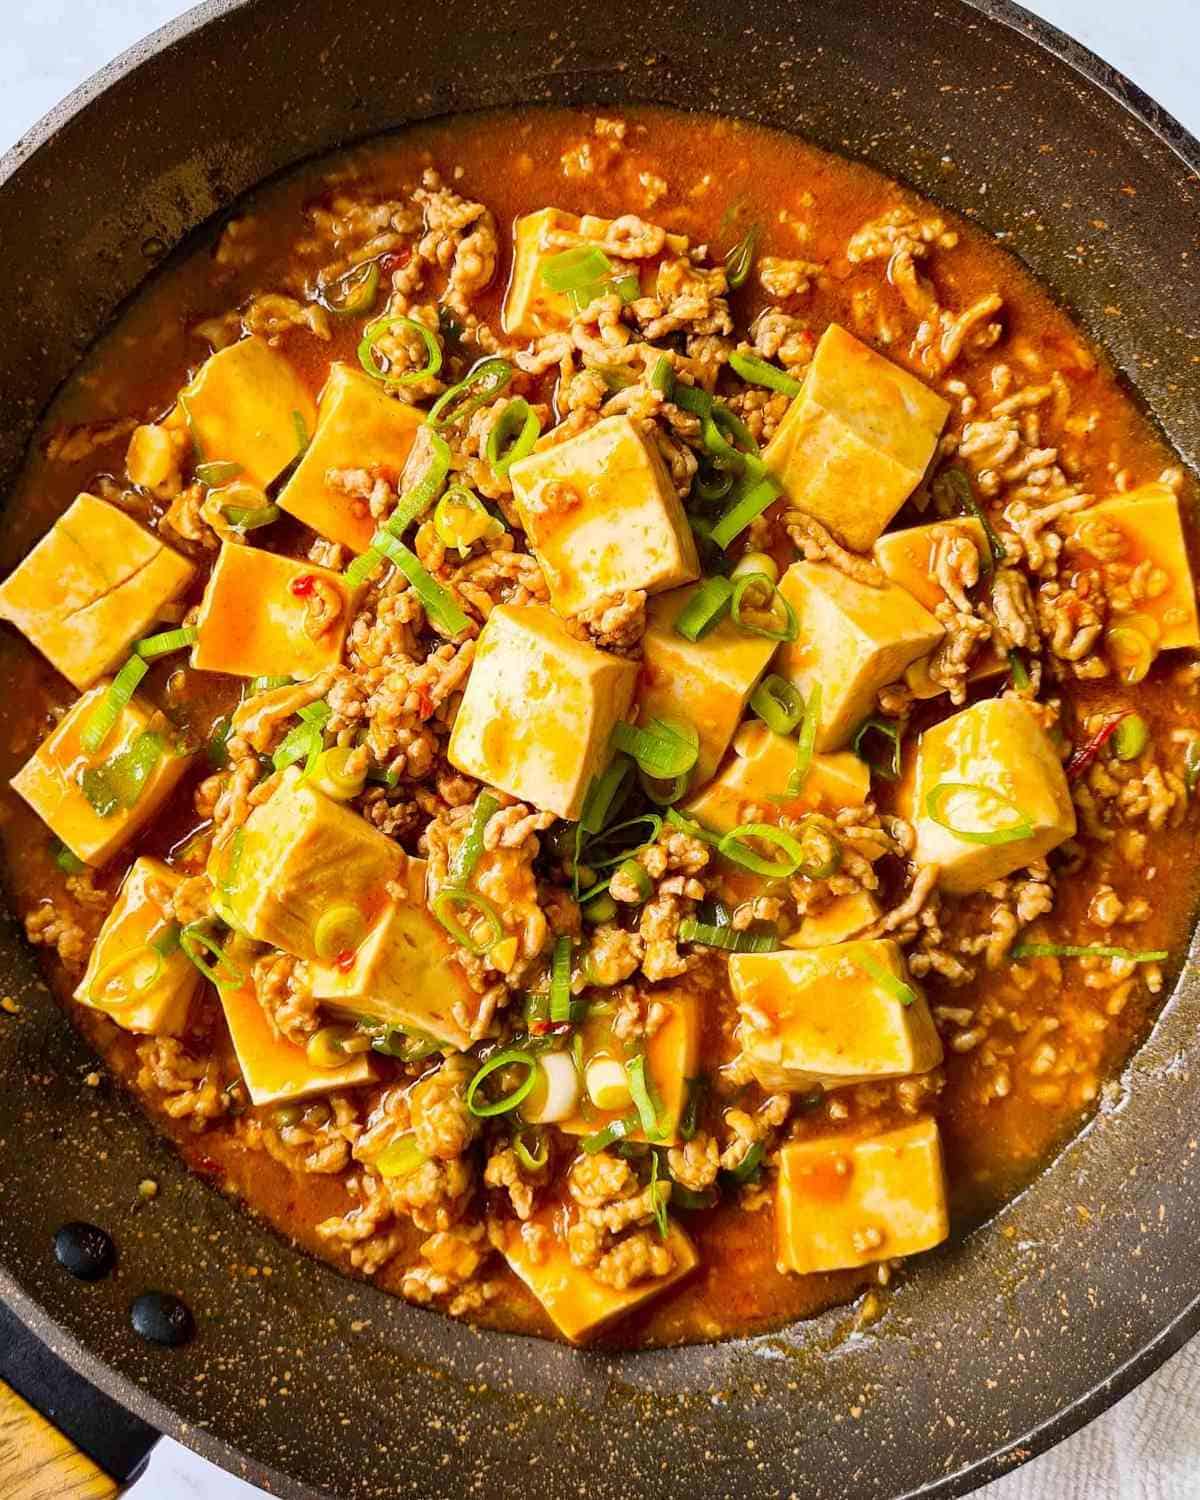 Freshly cooked mapo tofu in a non-stick pan